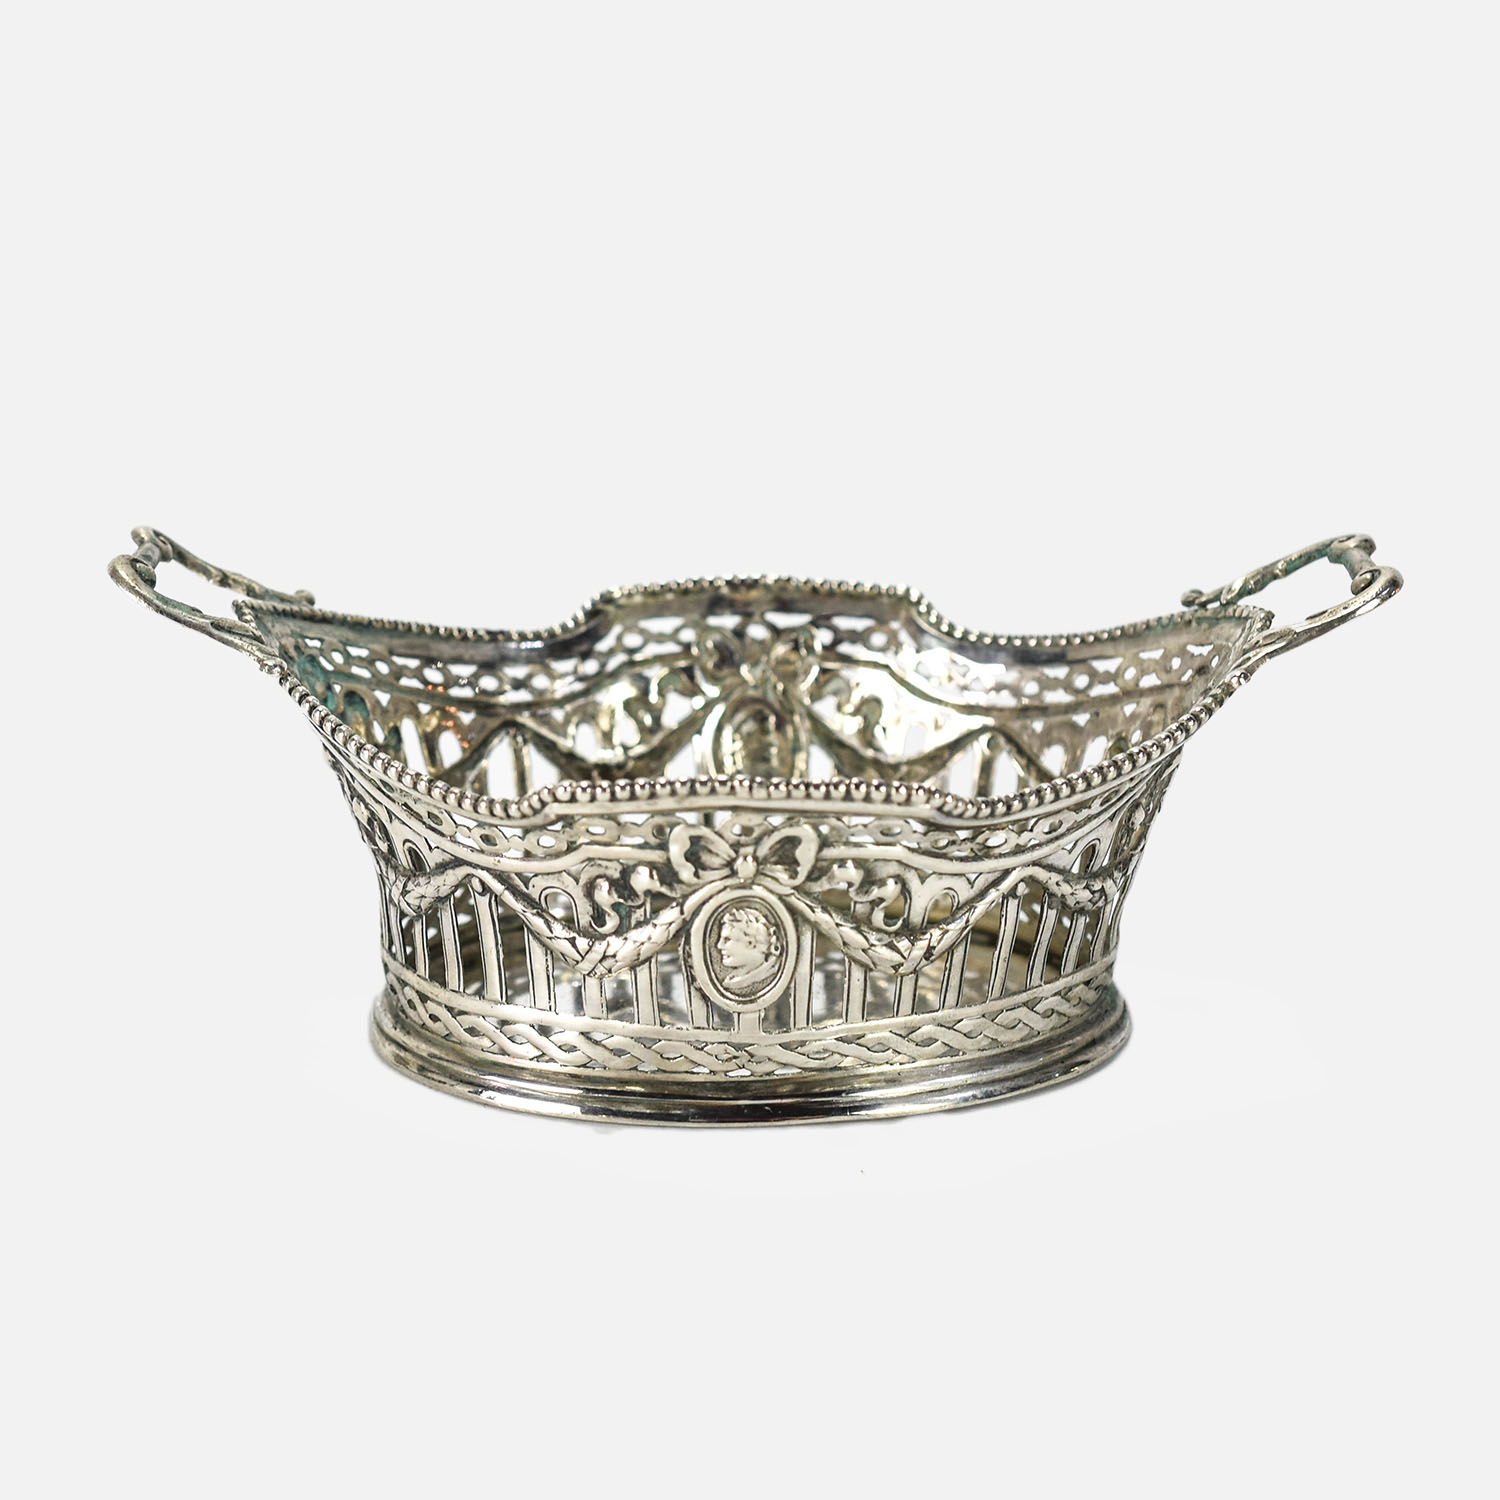 Antique Continental Reticulated Silver Basket